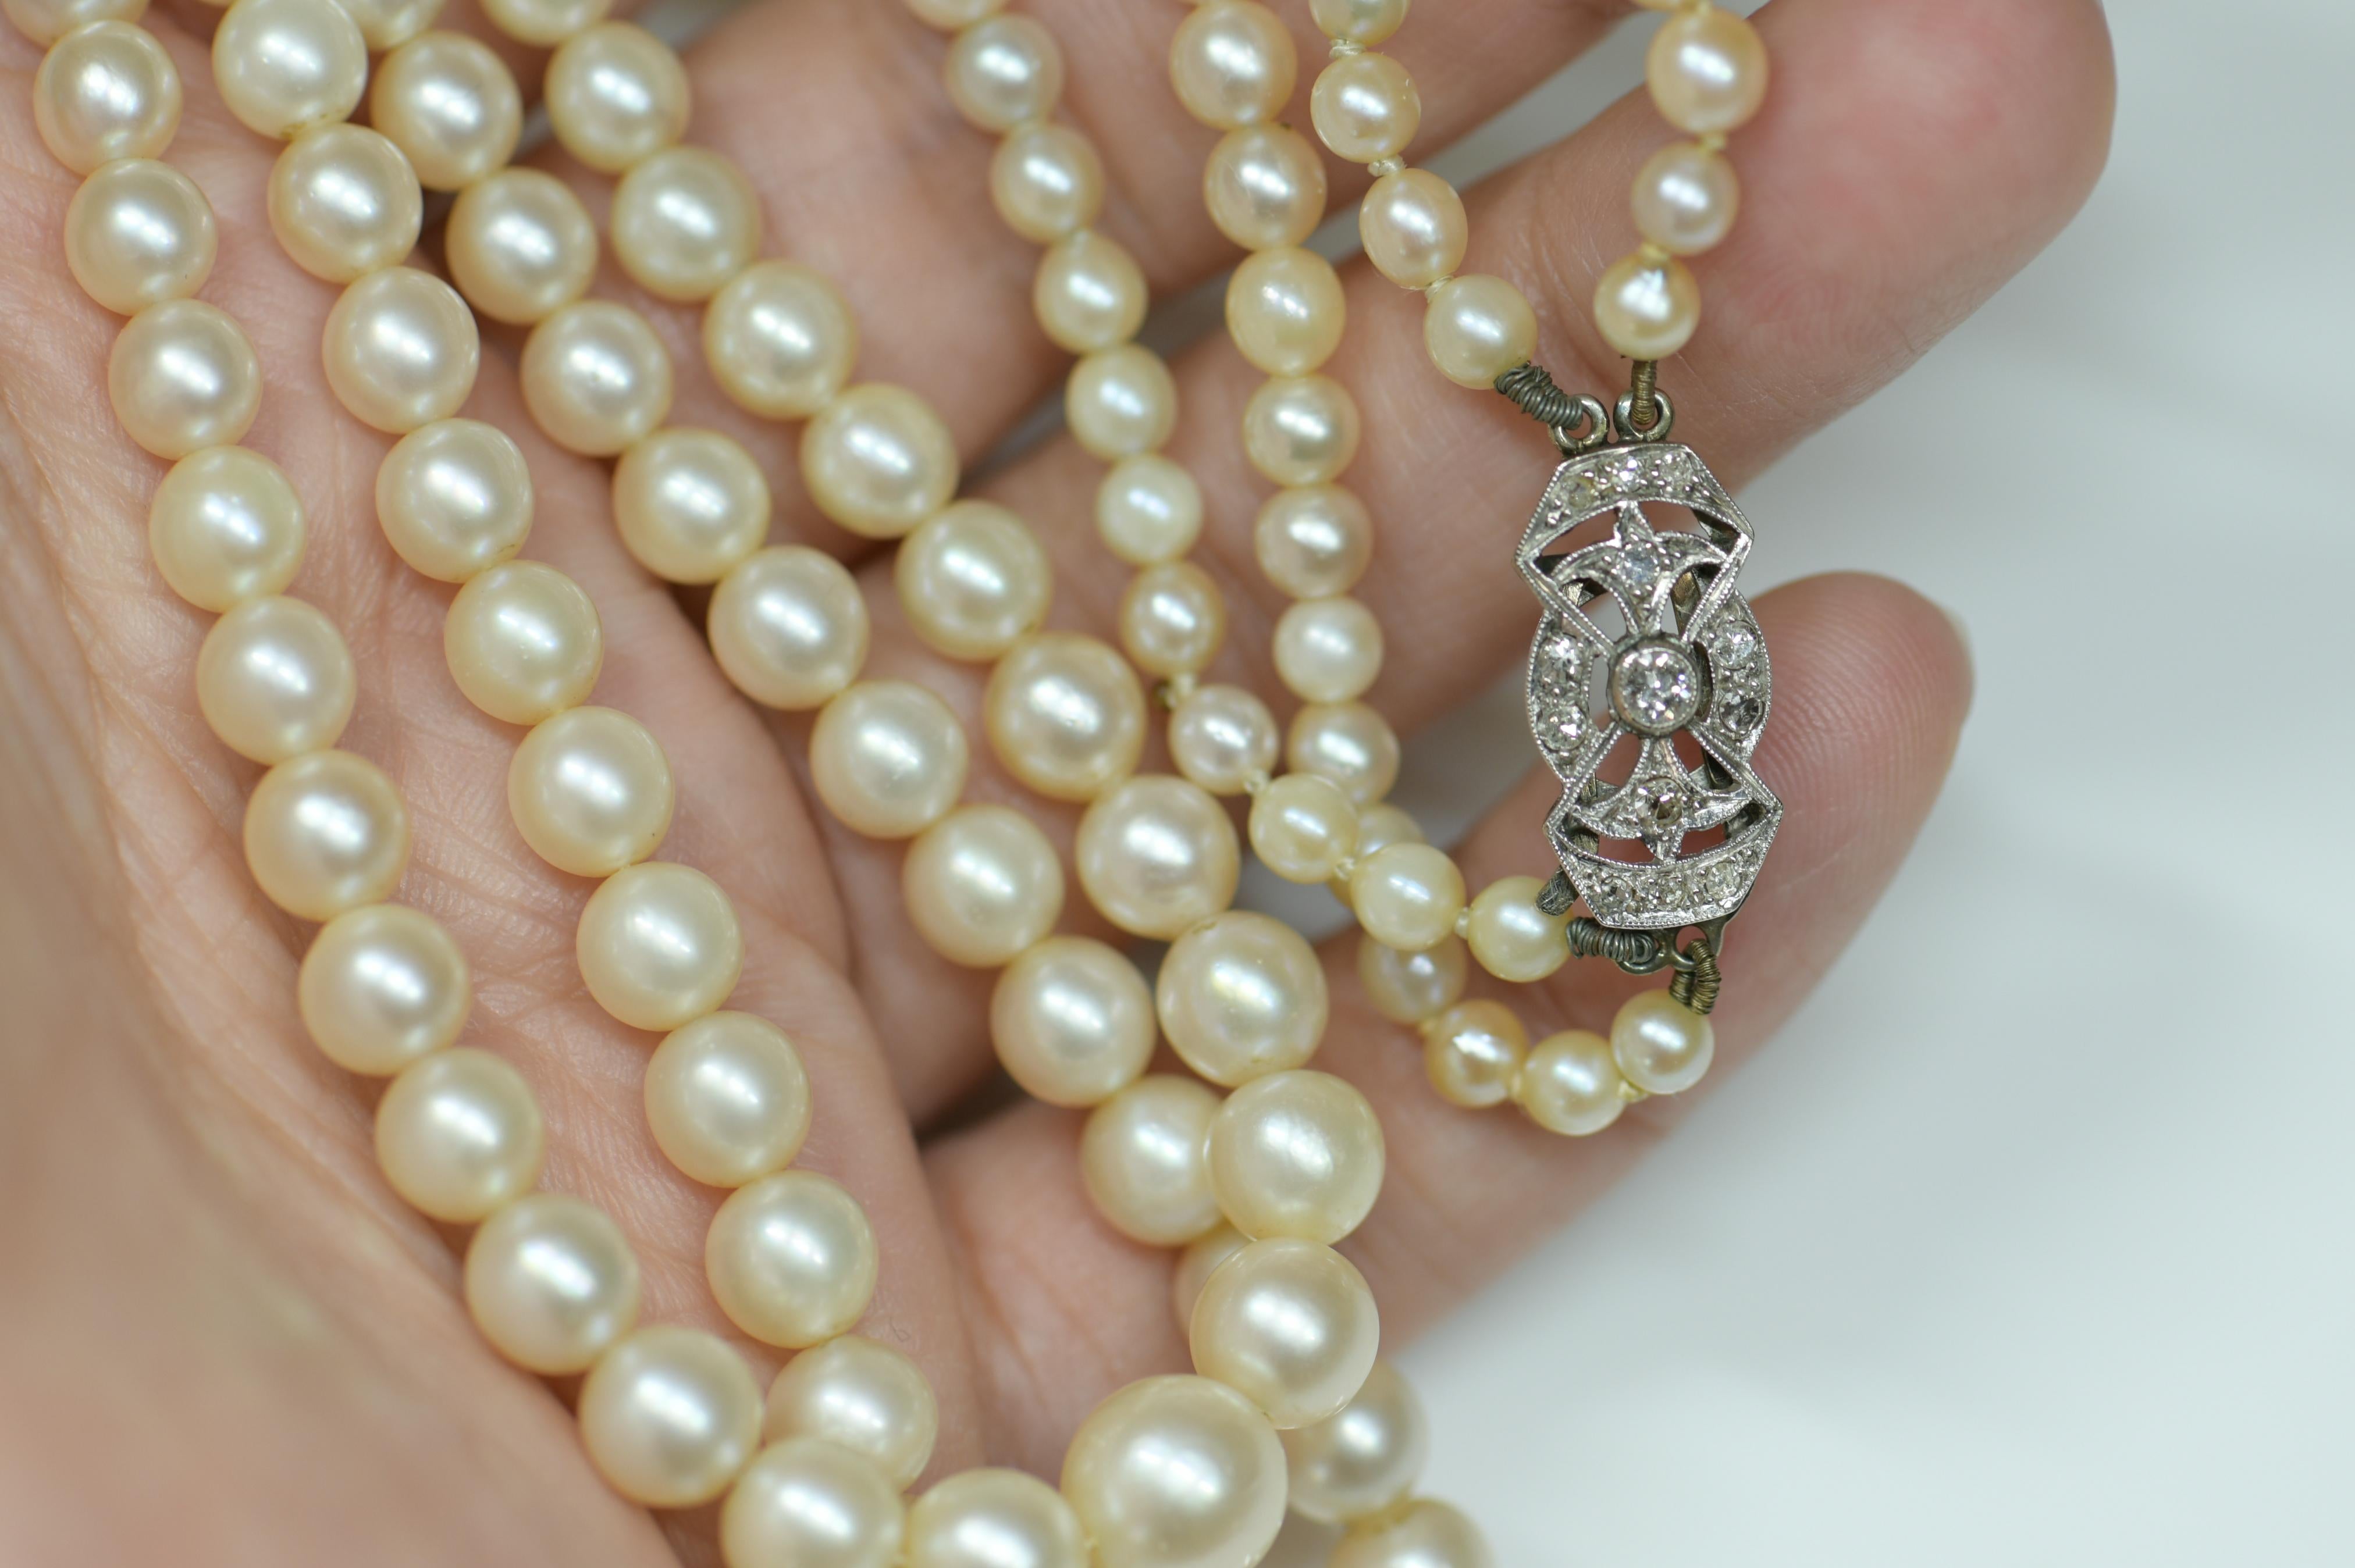 This beautiful necklace of lustrous white pearls dates from circa 1910. Lustrous graduated double white, creamy, dreamy cultured pearls culminate in a scintillating constellation of bright white and round diamonds in this elegant. Clasp measures 18